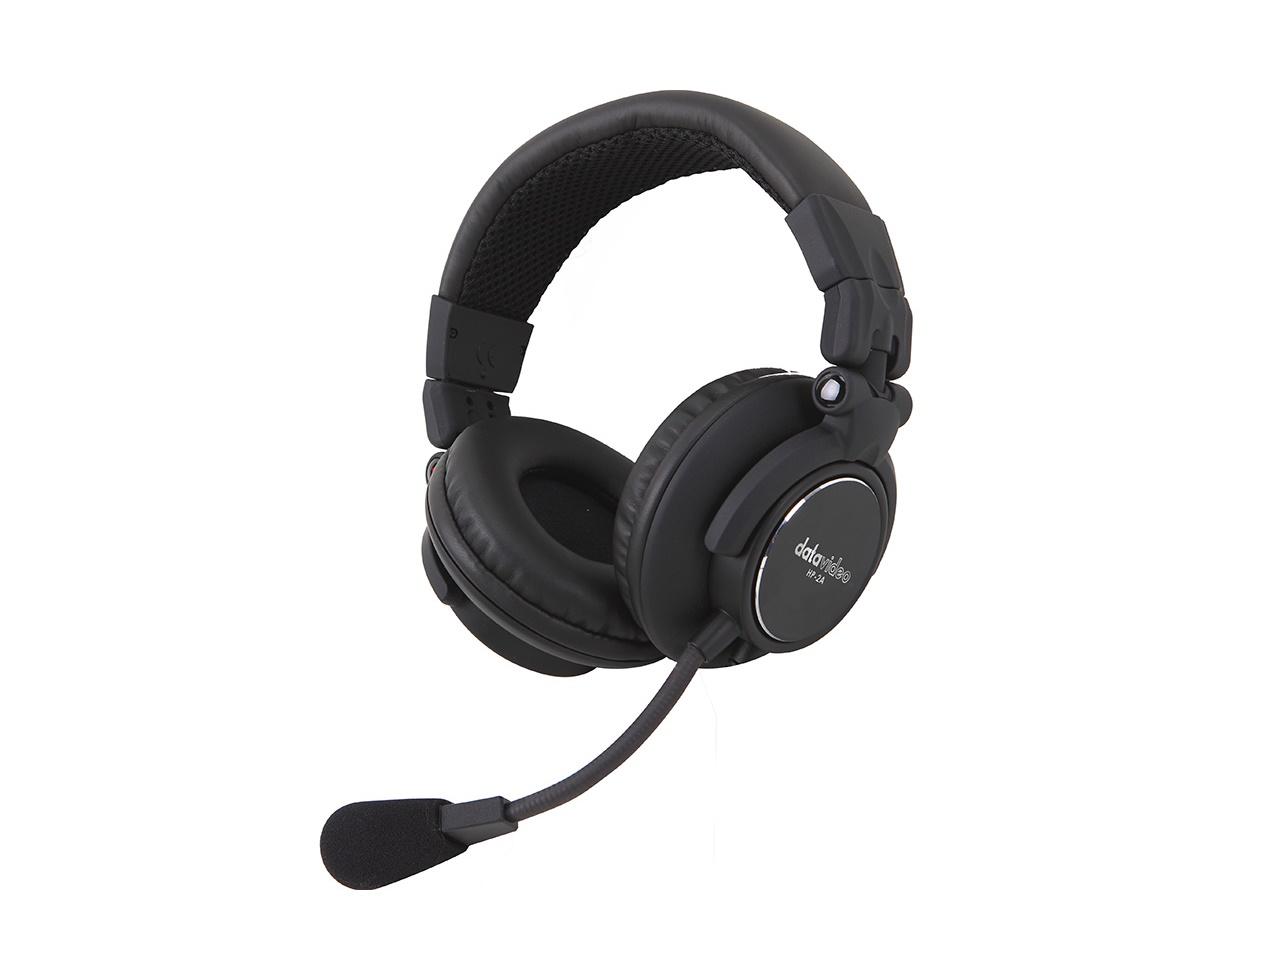 HP2A Dual-Ear Headset with Mic for the ITC-100 Belt Packs and Base Station by Datavideo